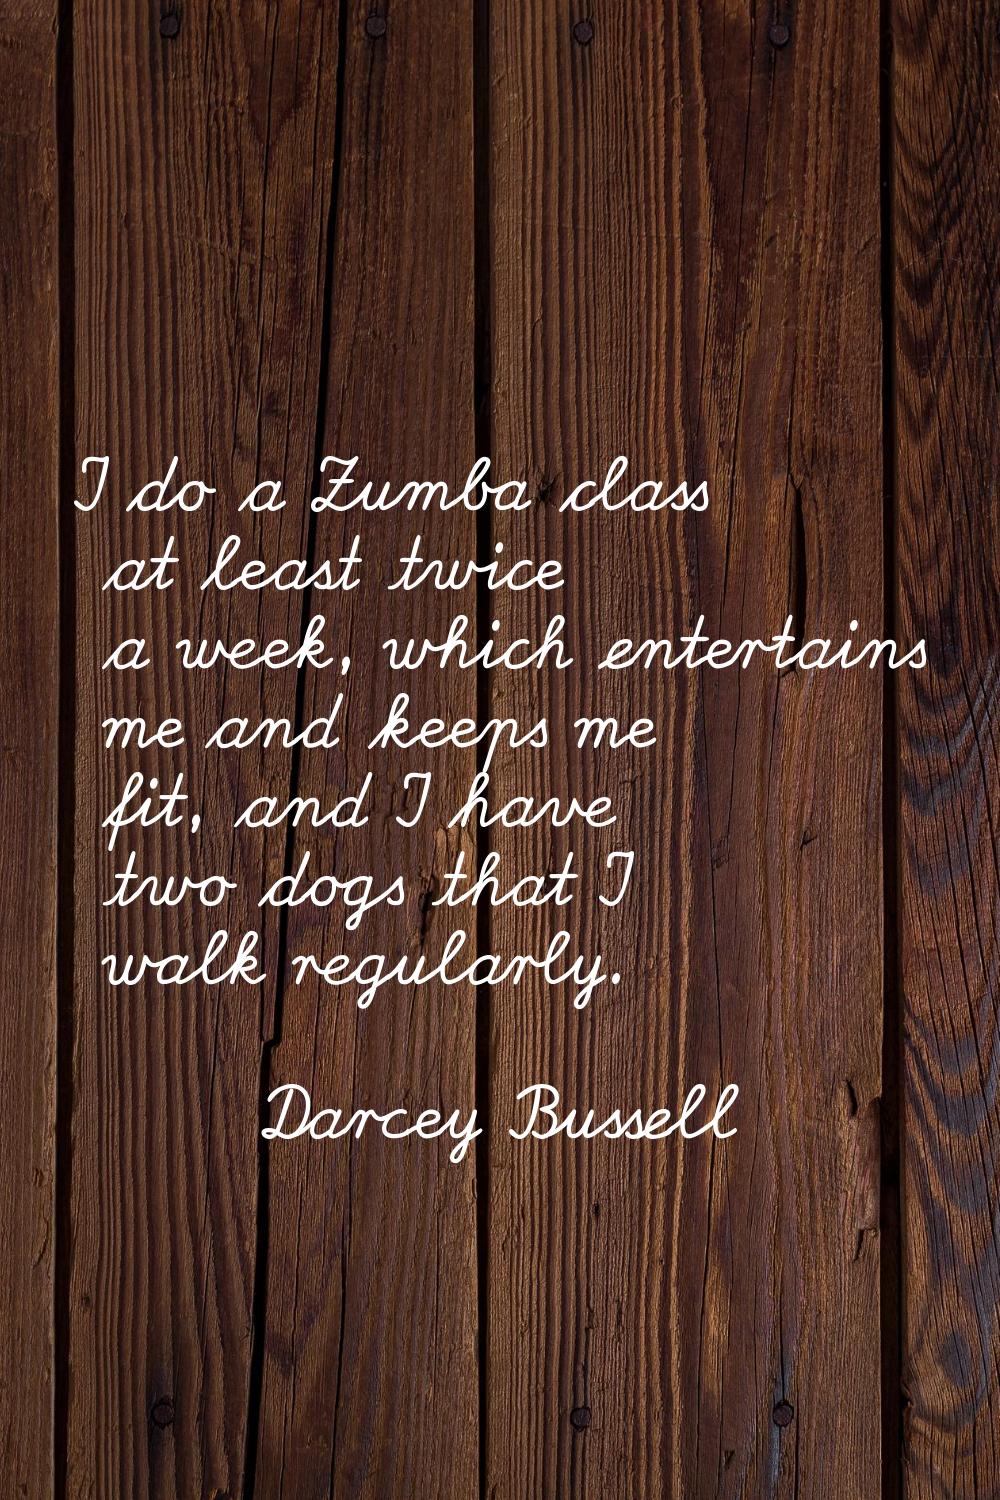 I do a Zumba class at least twice a week, which entertains me and keeps me fit, and I have two dogs